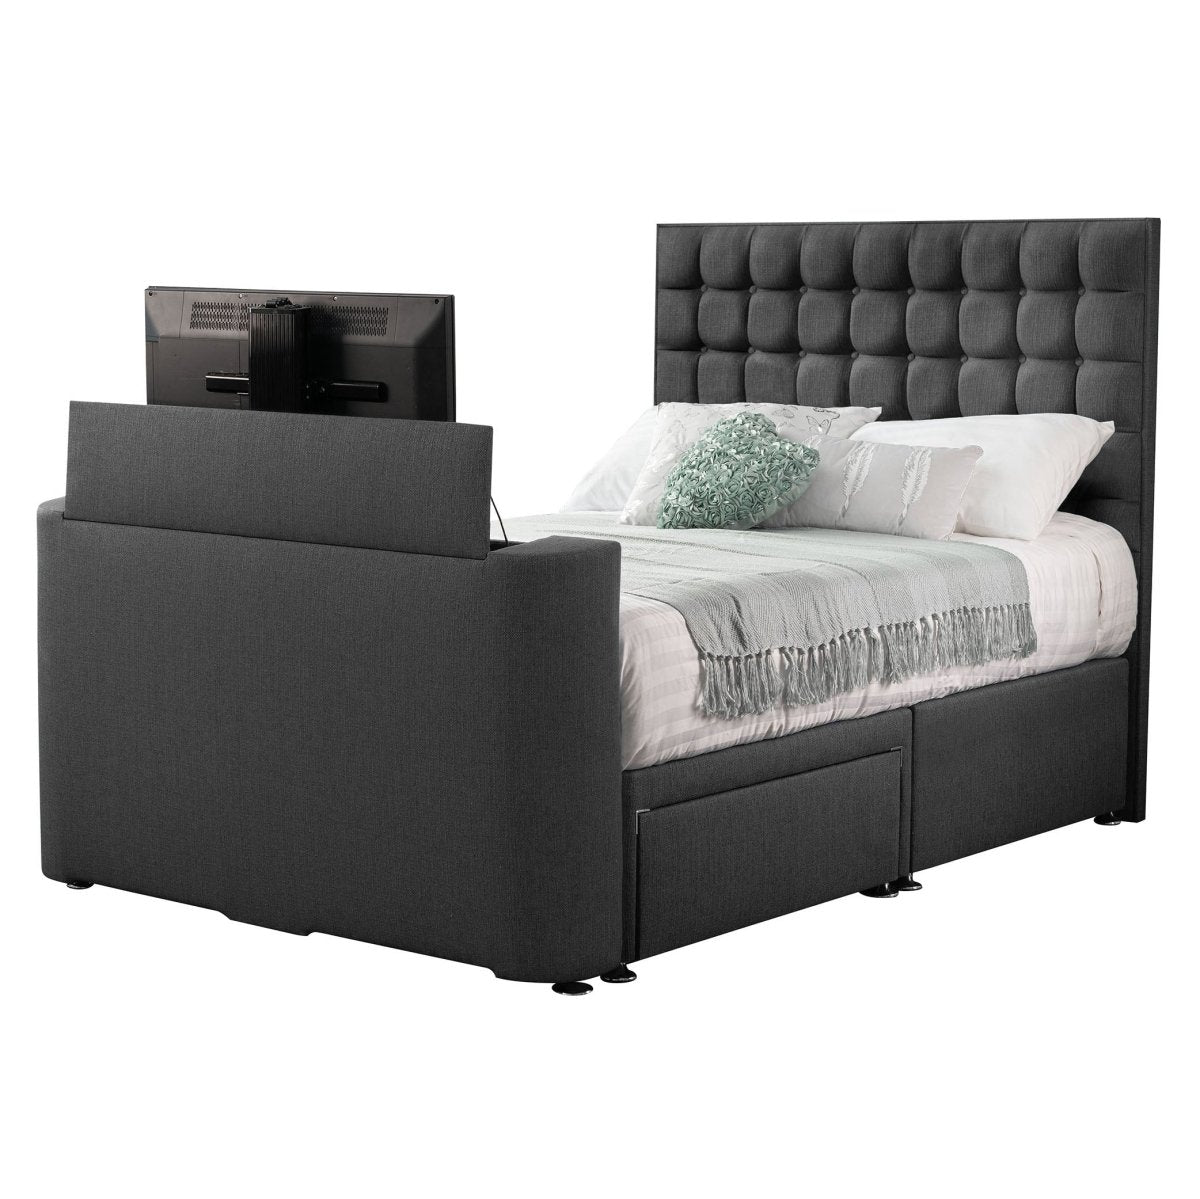 Sweet Dreams Image Classic TV Bed Frame - TV Beds Northwest - INIMA-CLA-135PT4DCHATS OYSTER - choose your colour tvbed - doubletvbed